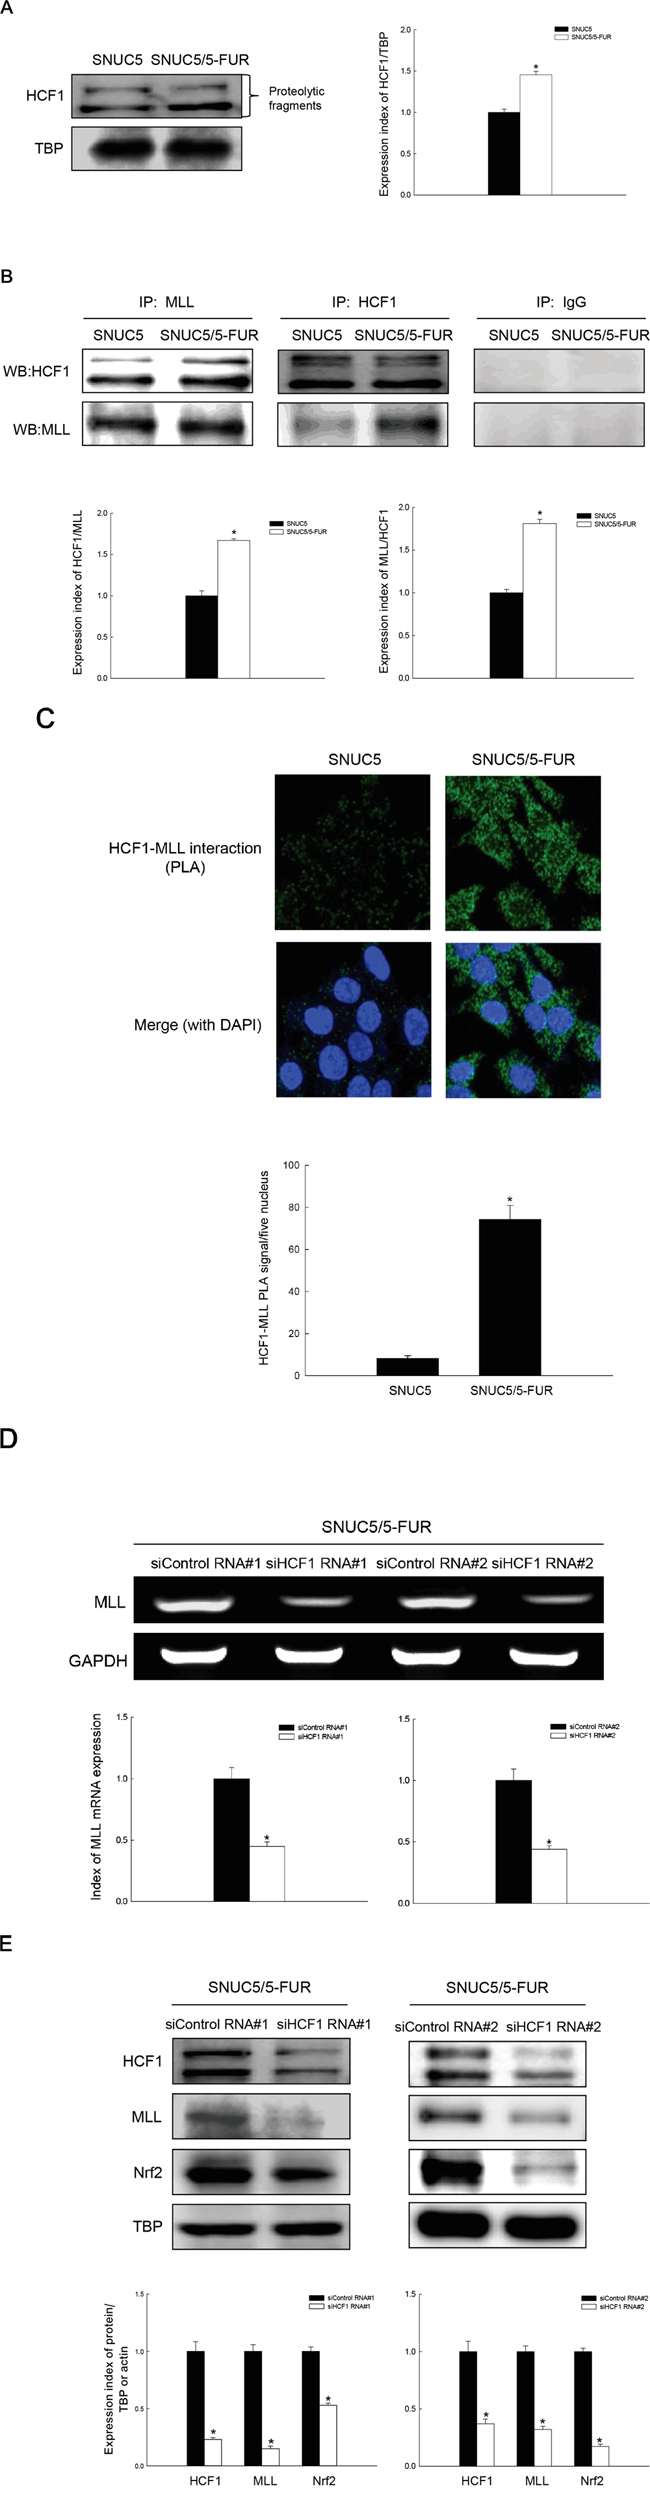 Effect of MLL-HCF1 interaction on histone methylation and Nrf2 expression in SNUC5/5-FUR cells.